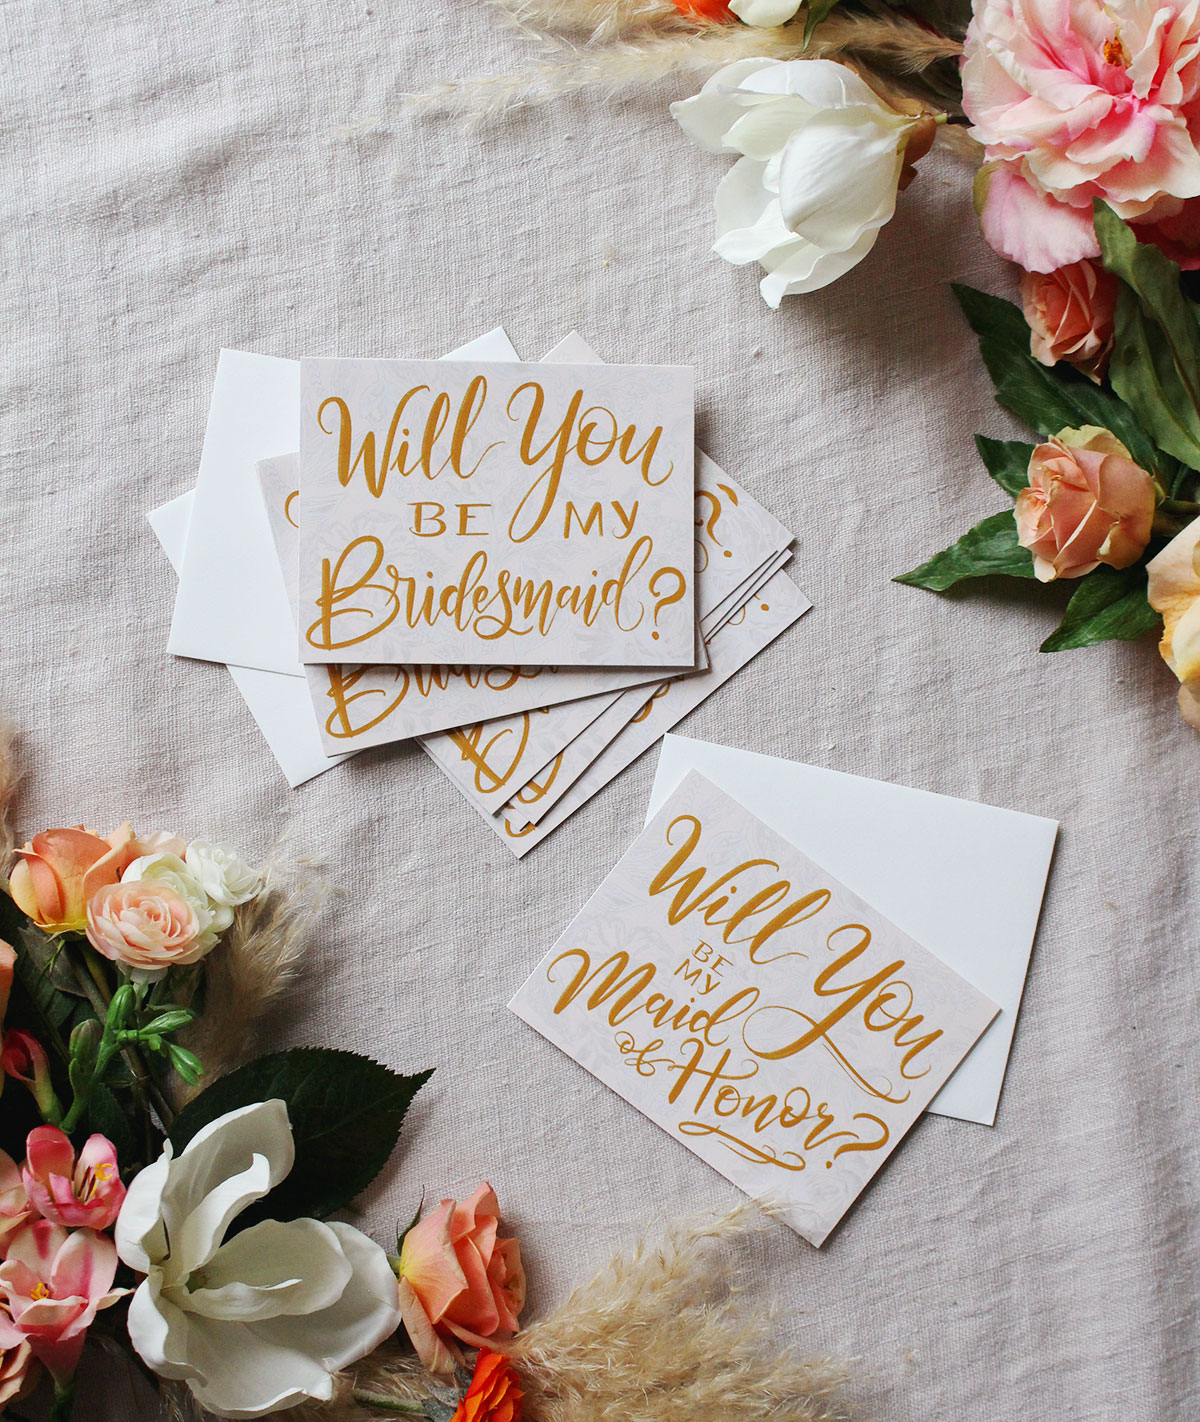 The Lily & Val Wedding Collection - hand-drawn wedding art, printables, guestbook, cards, and more